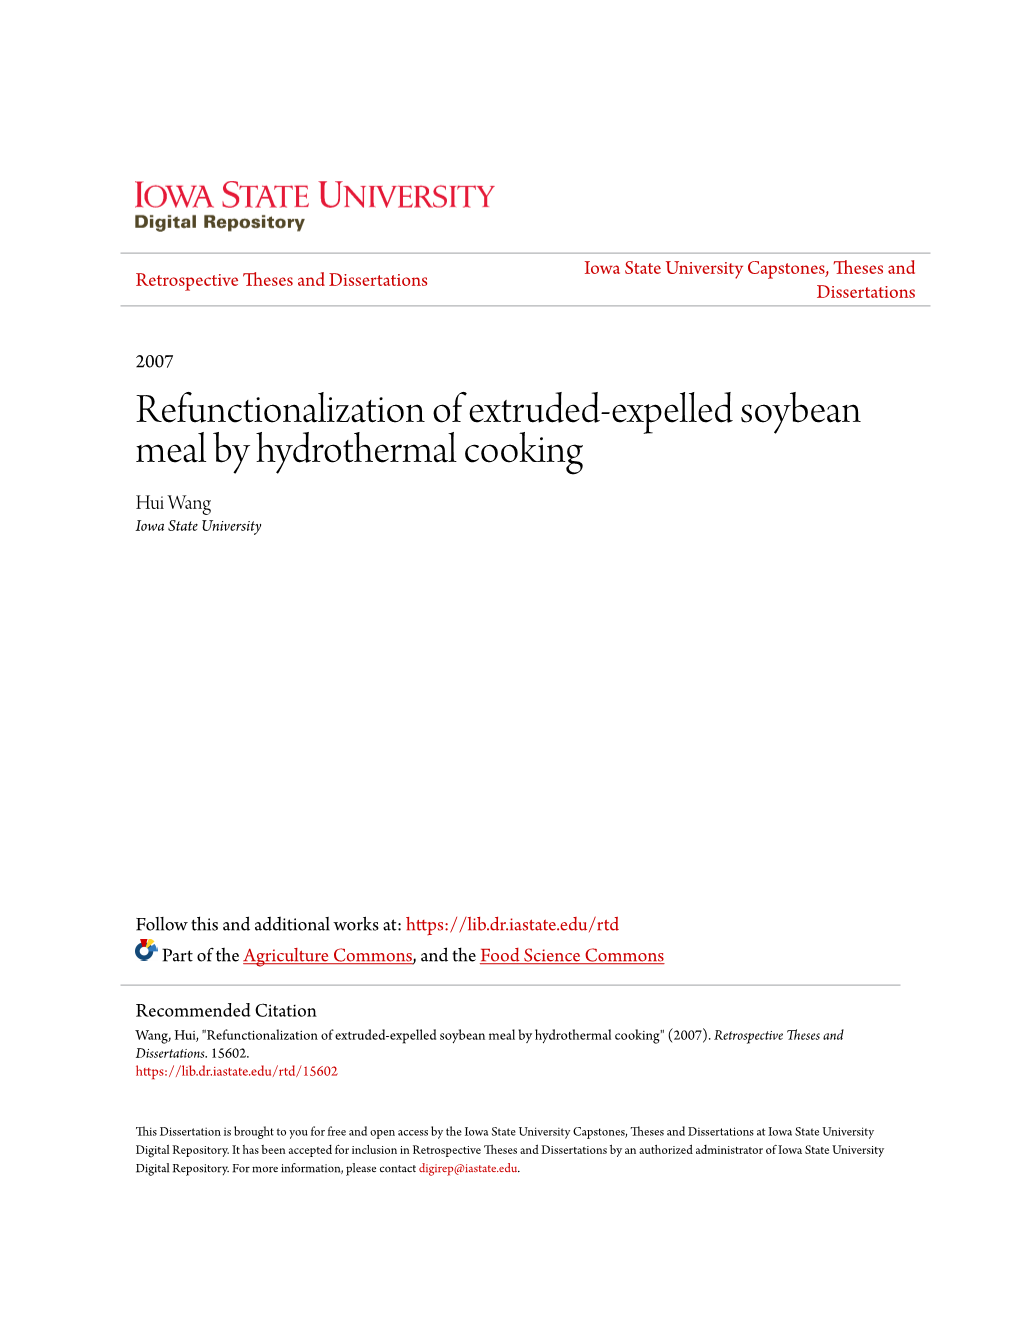 Refunctionalization of Extruded-Expelled Soybean Meal by Hydrothermal Cooking Hui Wang Iowa State University